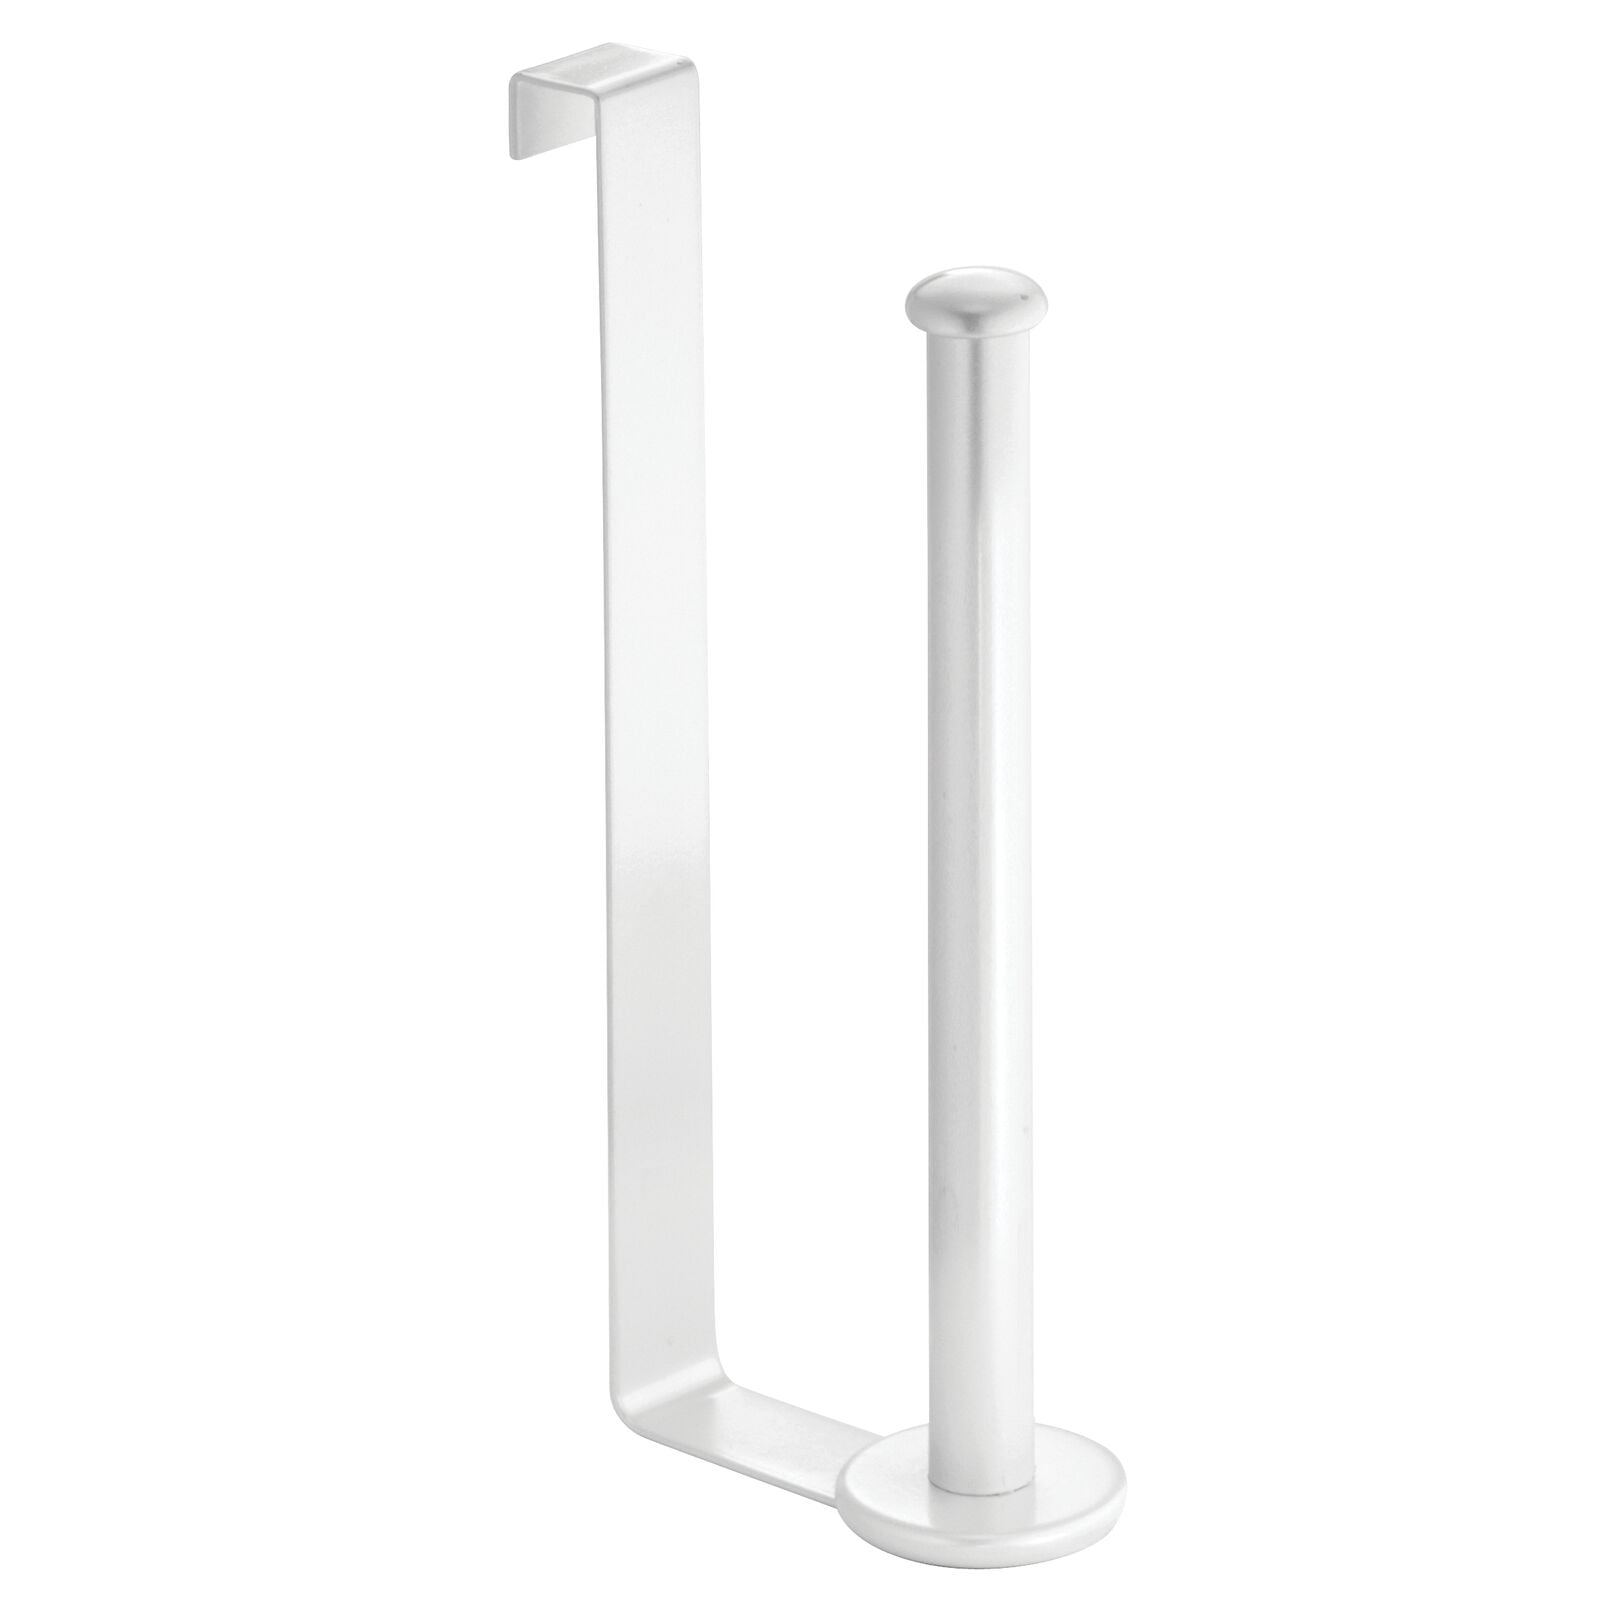 Matte White Hanging mDesign Metal Wire Over The Tank Toilet Tissue Paper Roll Holder Dispenser and Reserve for Bathroom Storage and Organization Each Holds 2 Rolls 